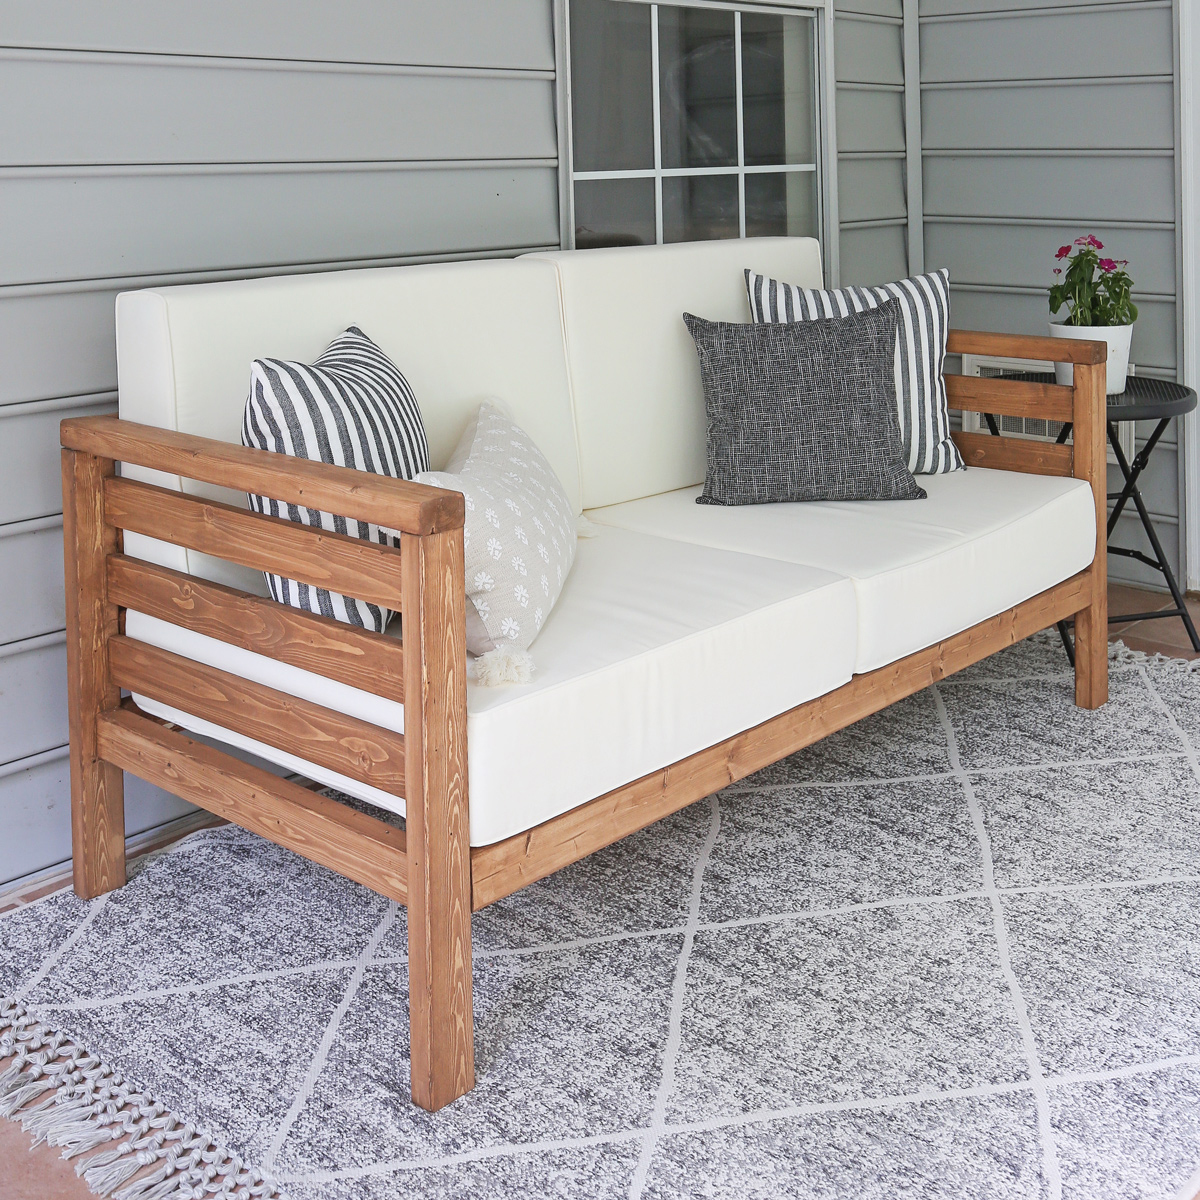 Diy Outdoor Couch Angela Marie Made, Free Diy Outdoor Sofa Plans